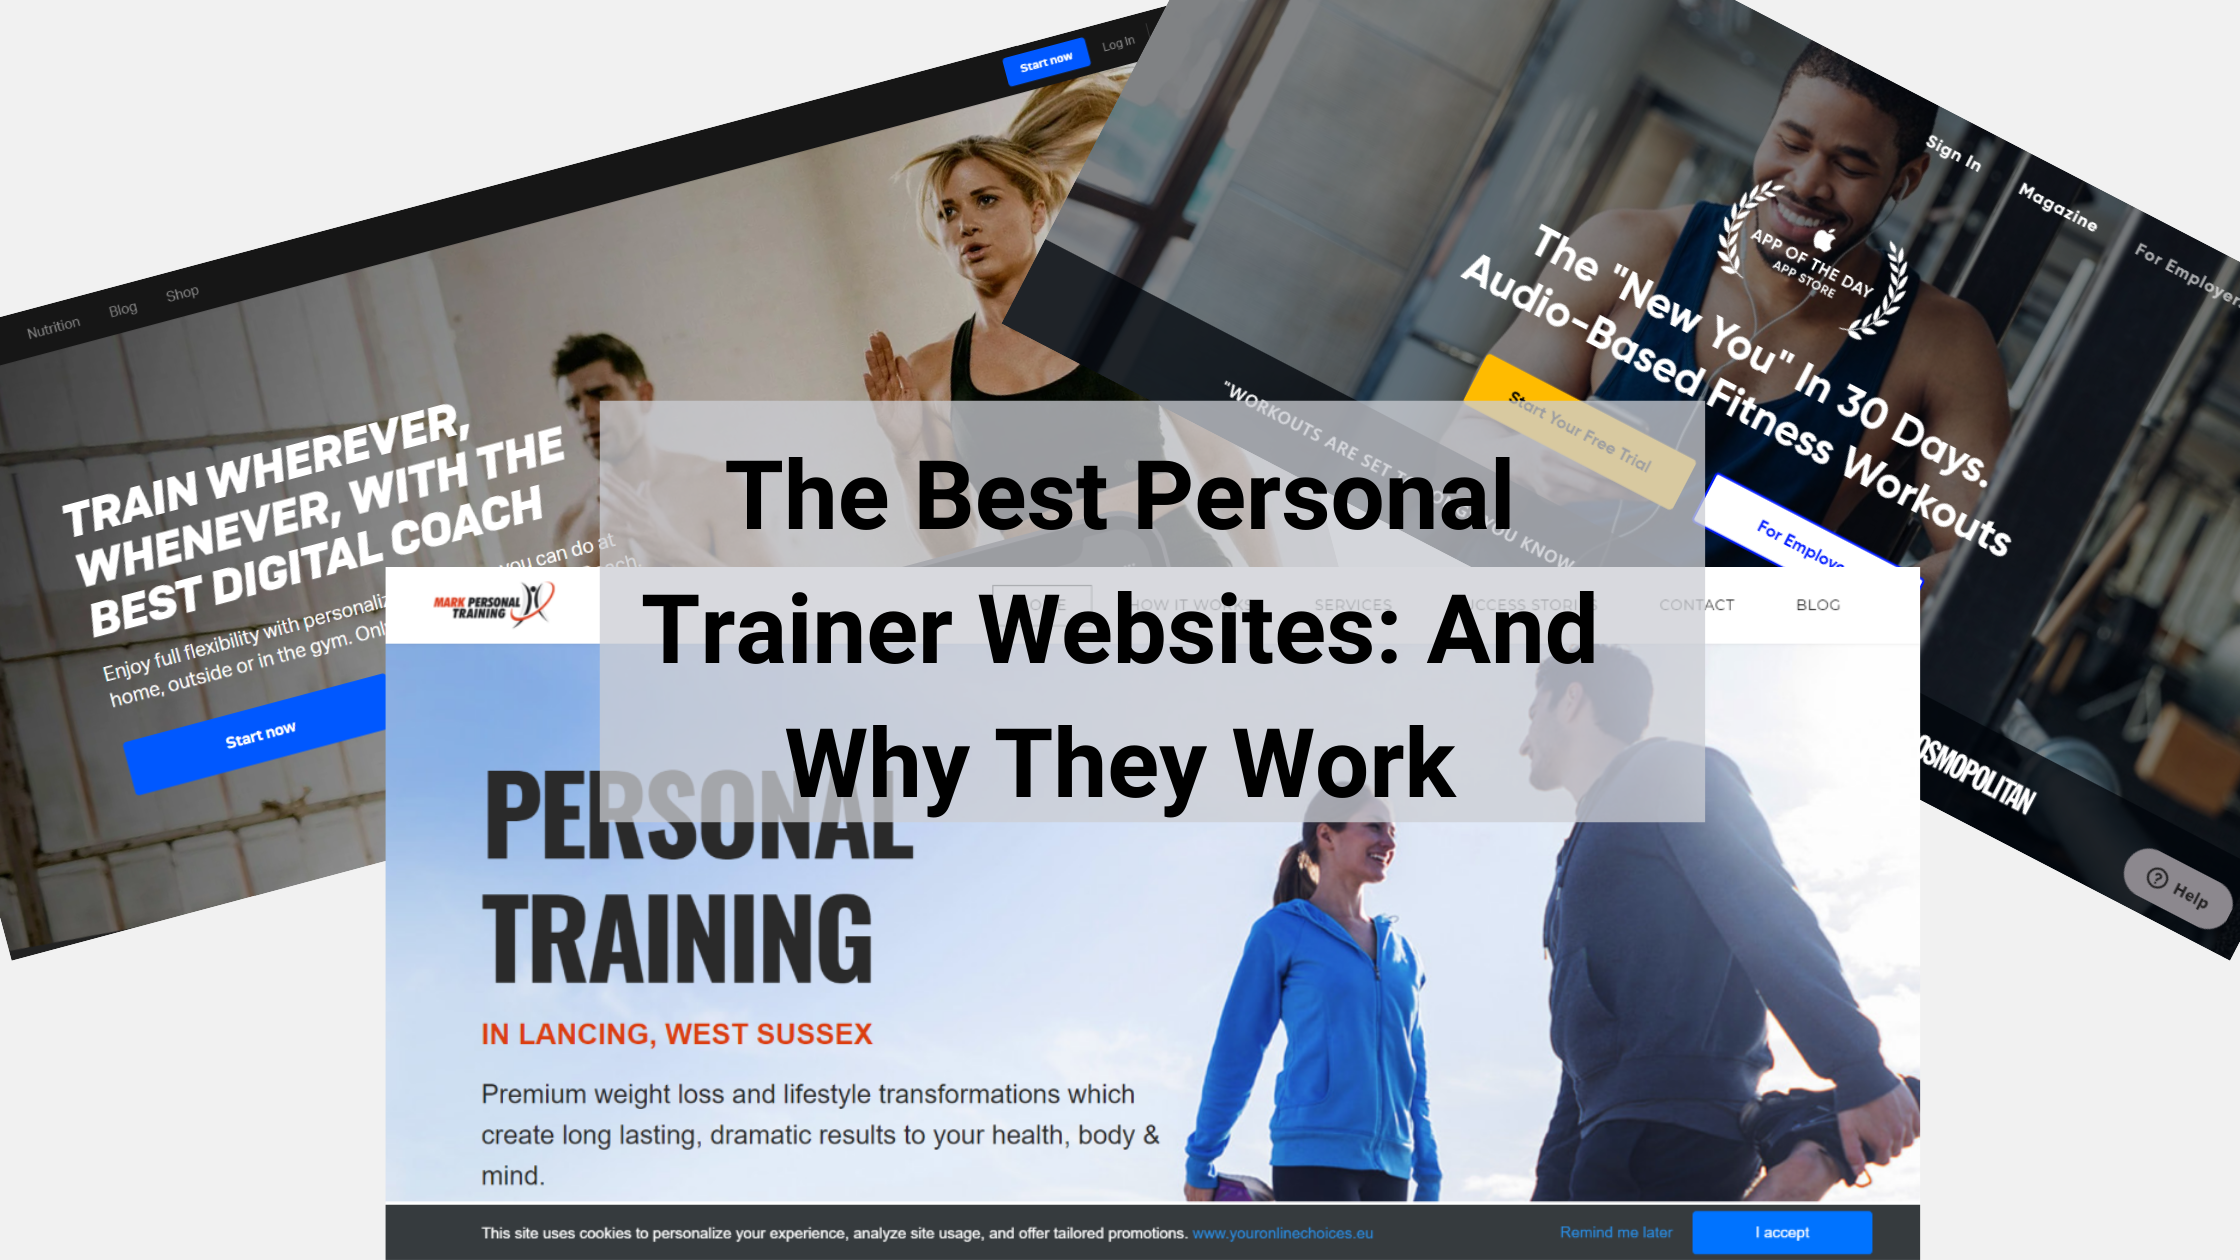 The Best Personal Trainer Websites